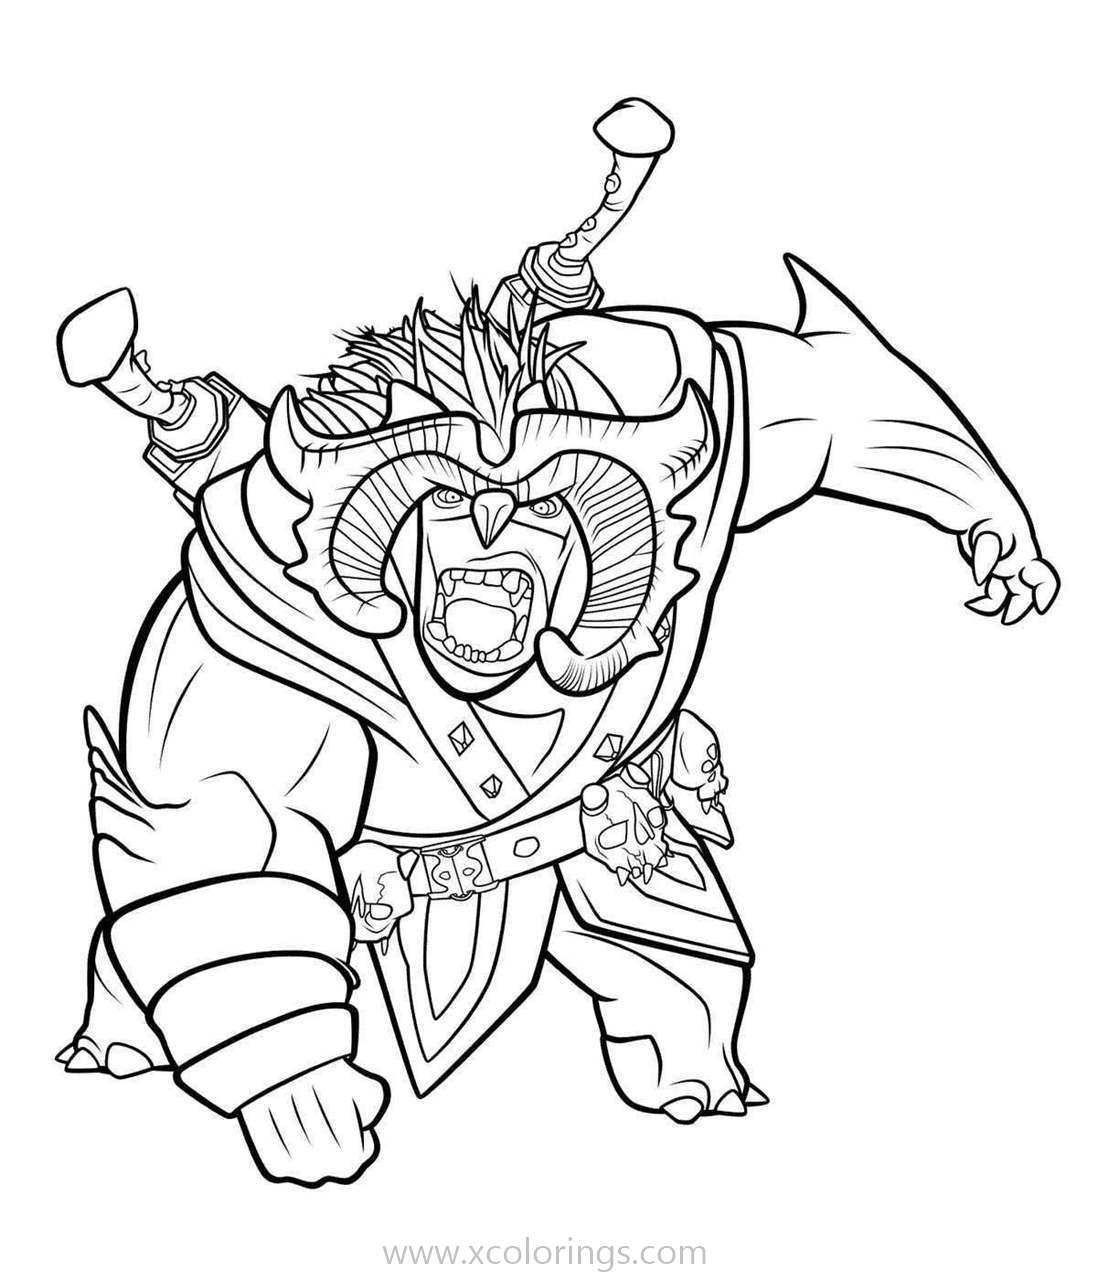 Printable Coloring Trollhunters Coloring Pages - Everything you want to